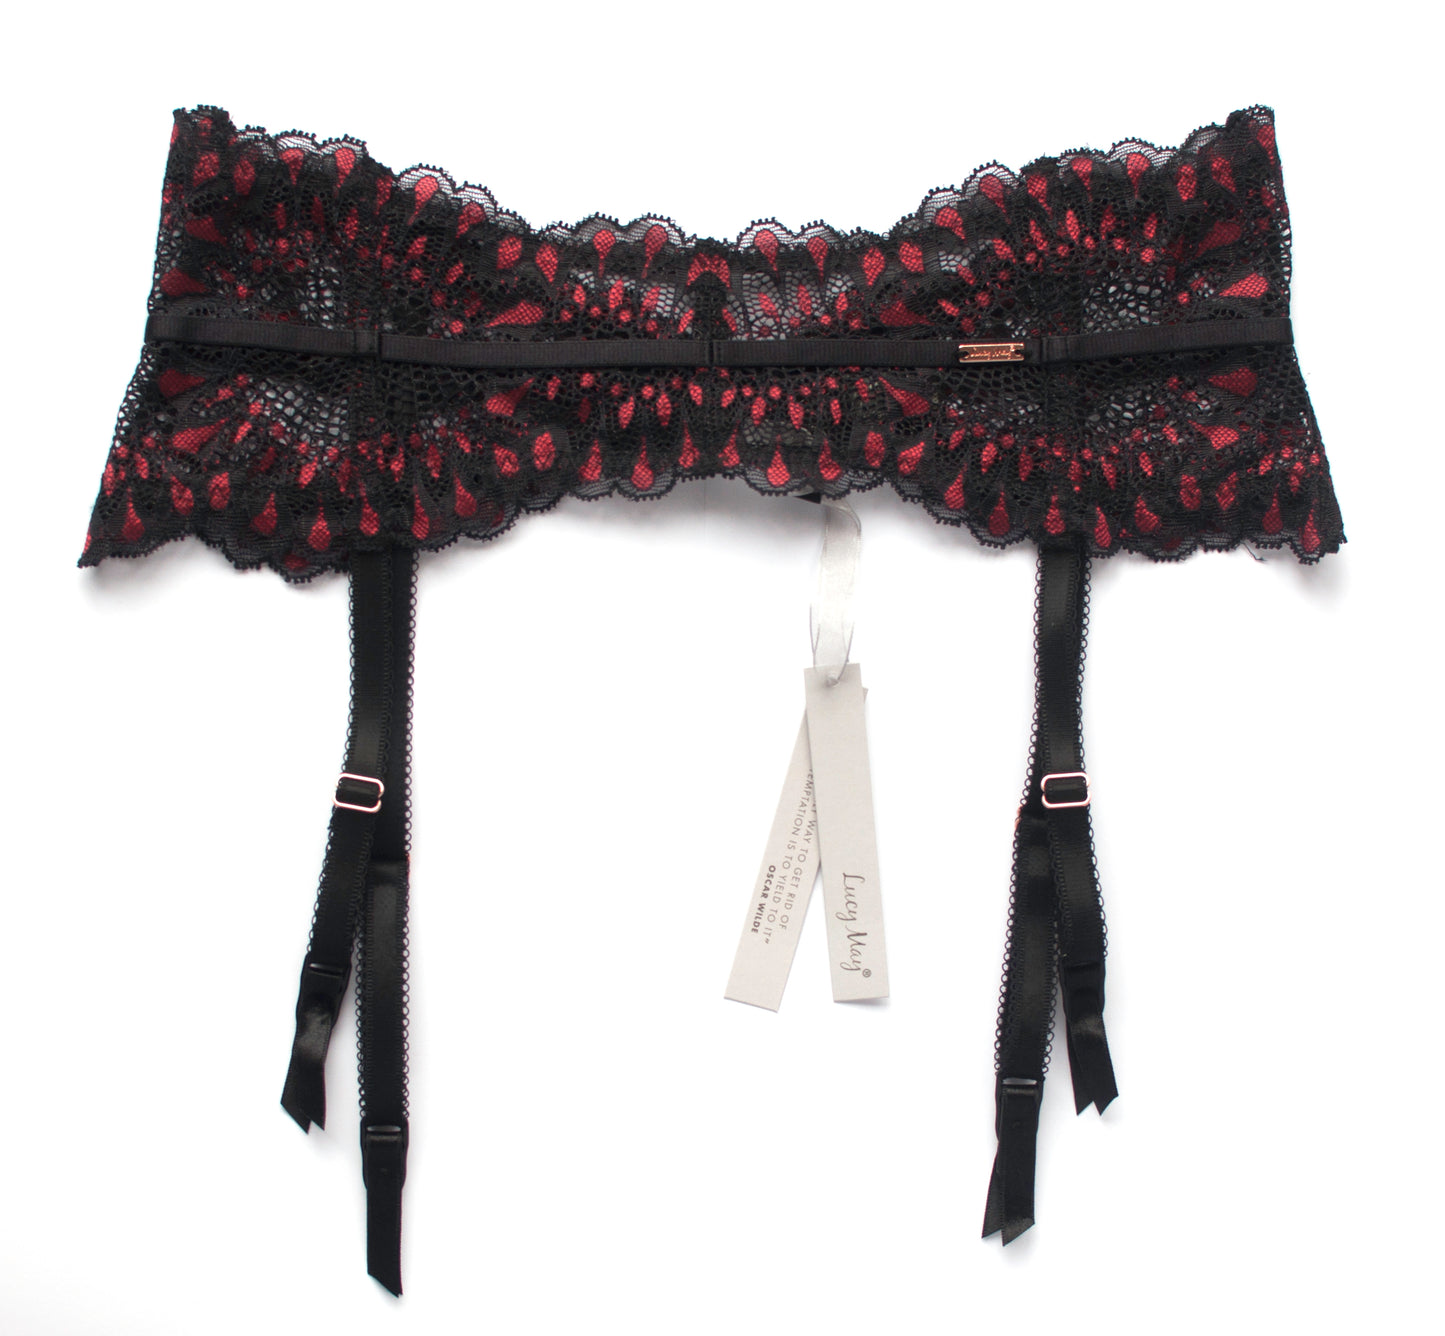 Black & red lace Lucy May Maybella Suspender